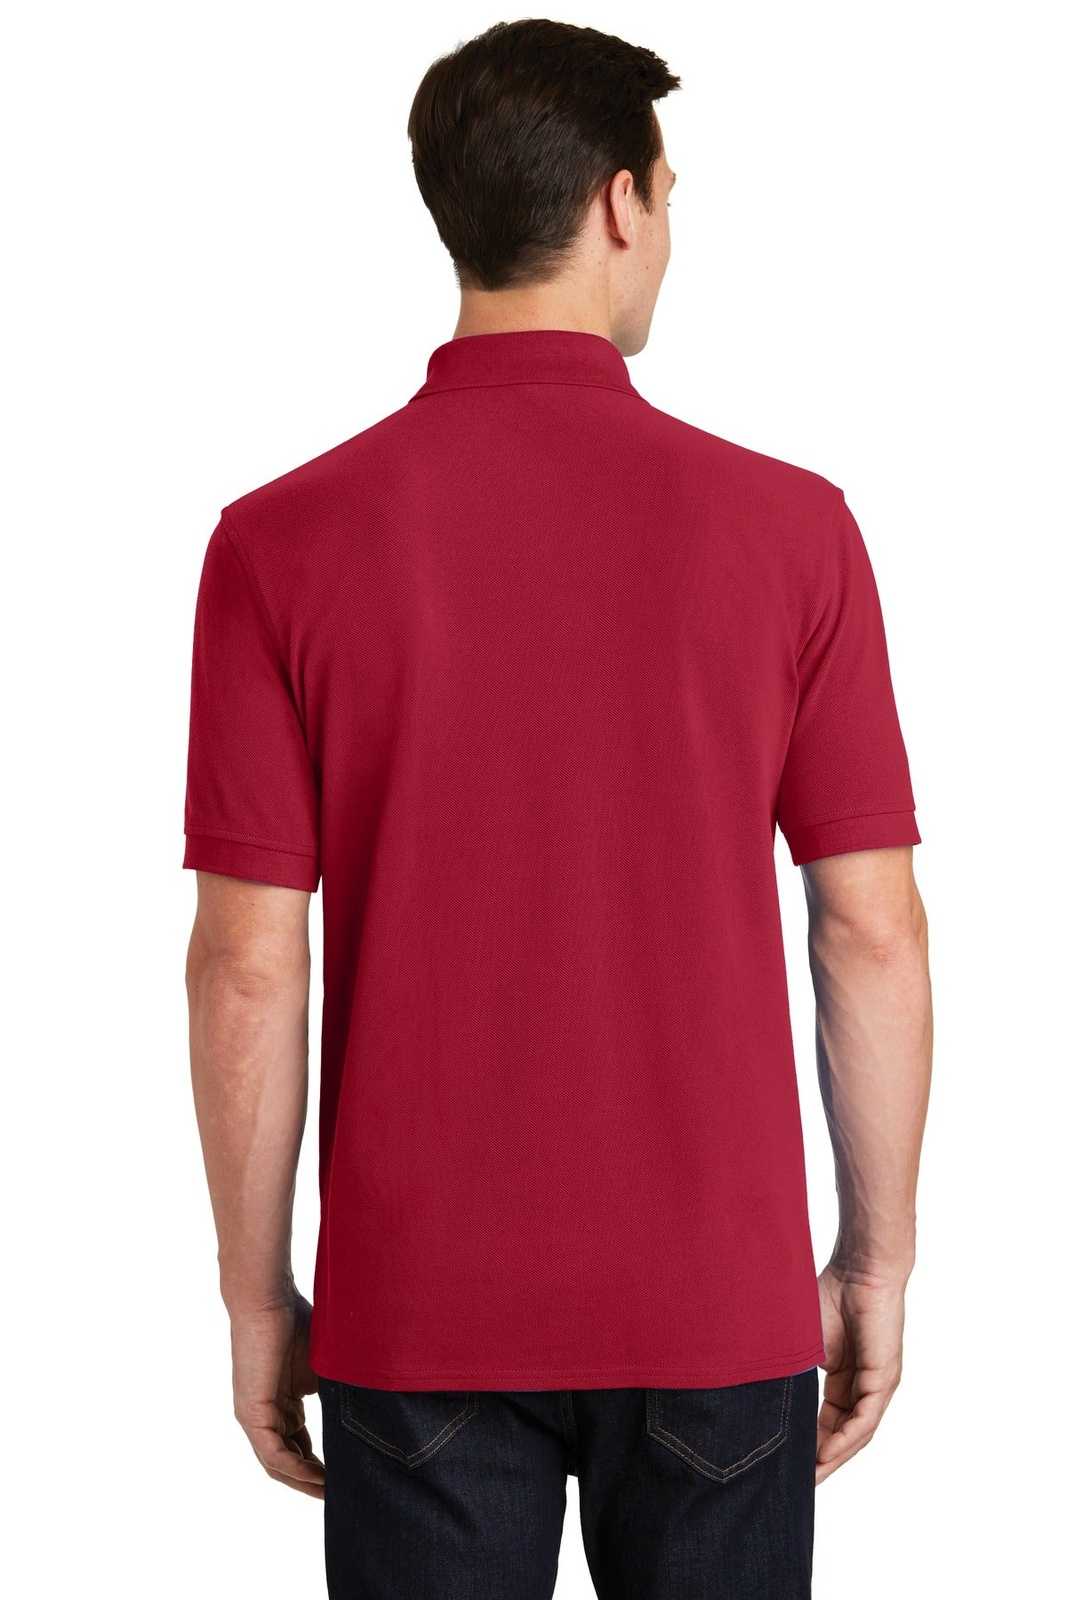 Port & Company KP1500 Combed Ring Spun Pique Polo - Red - HIT a Double - 1